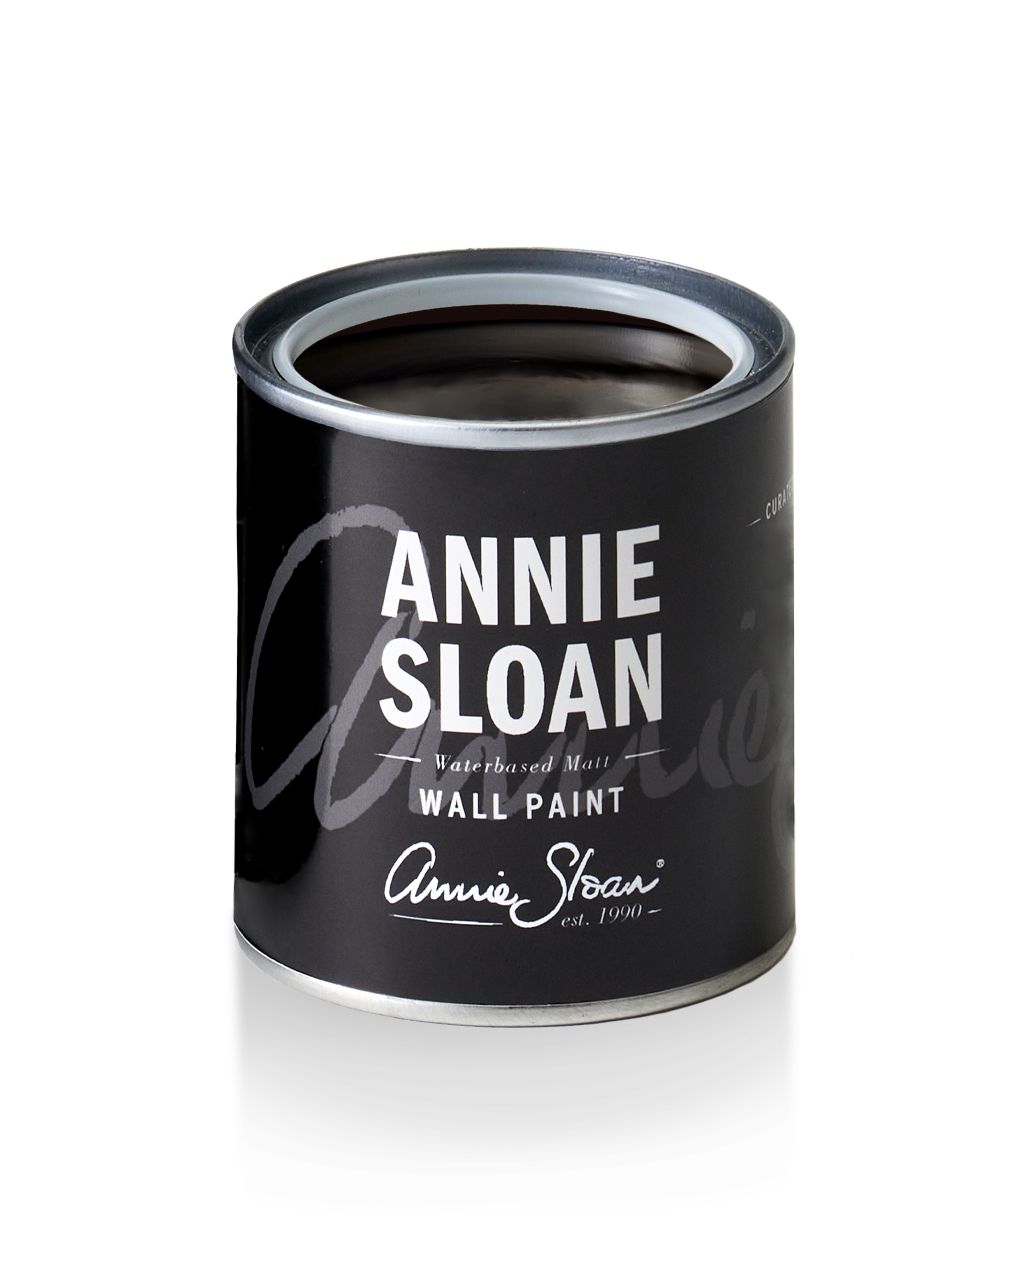 120ml tin of Athenian Black wall paint by Annie Sloan